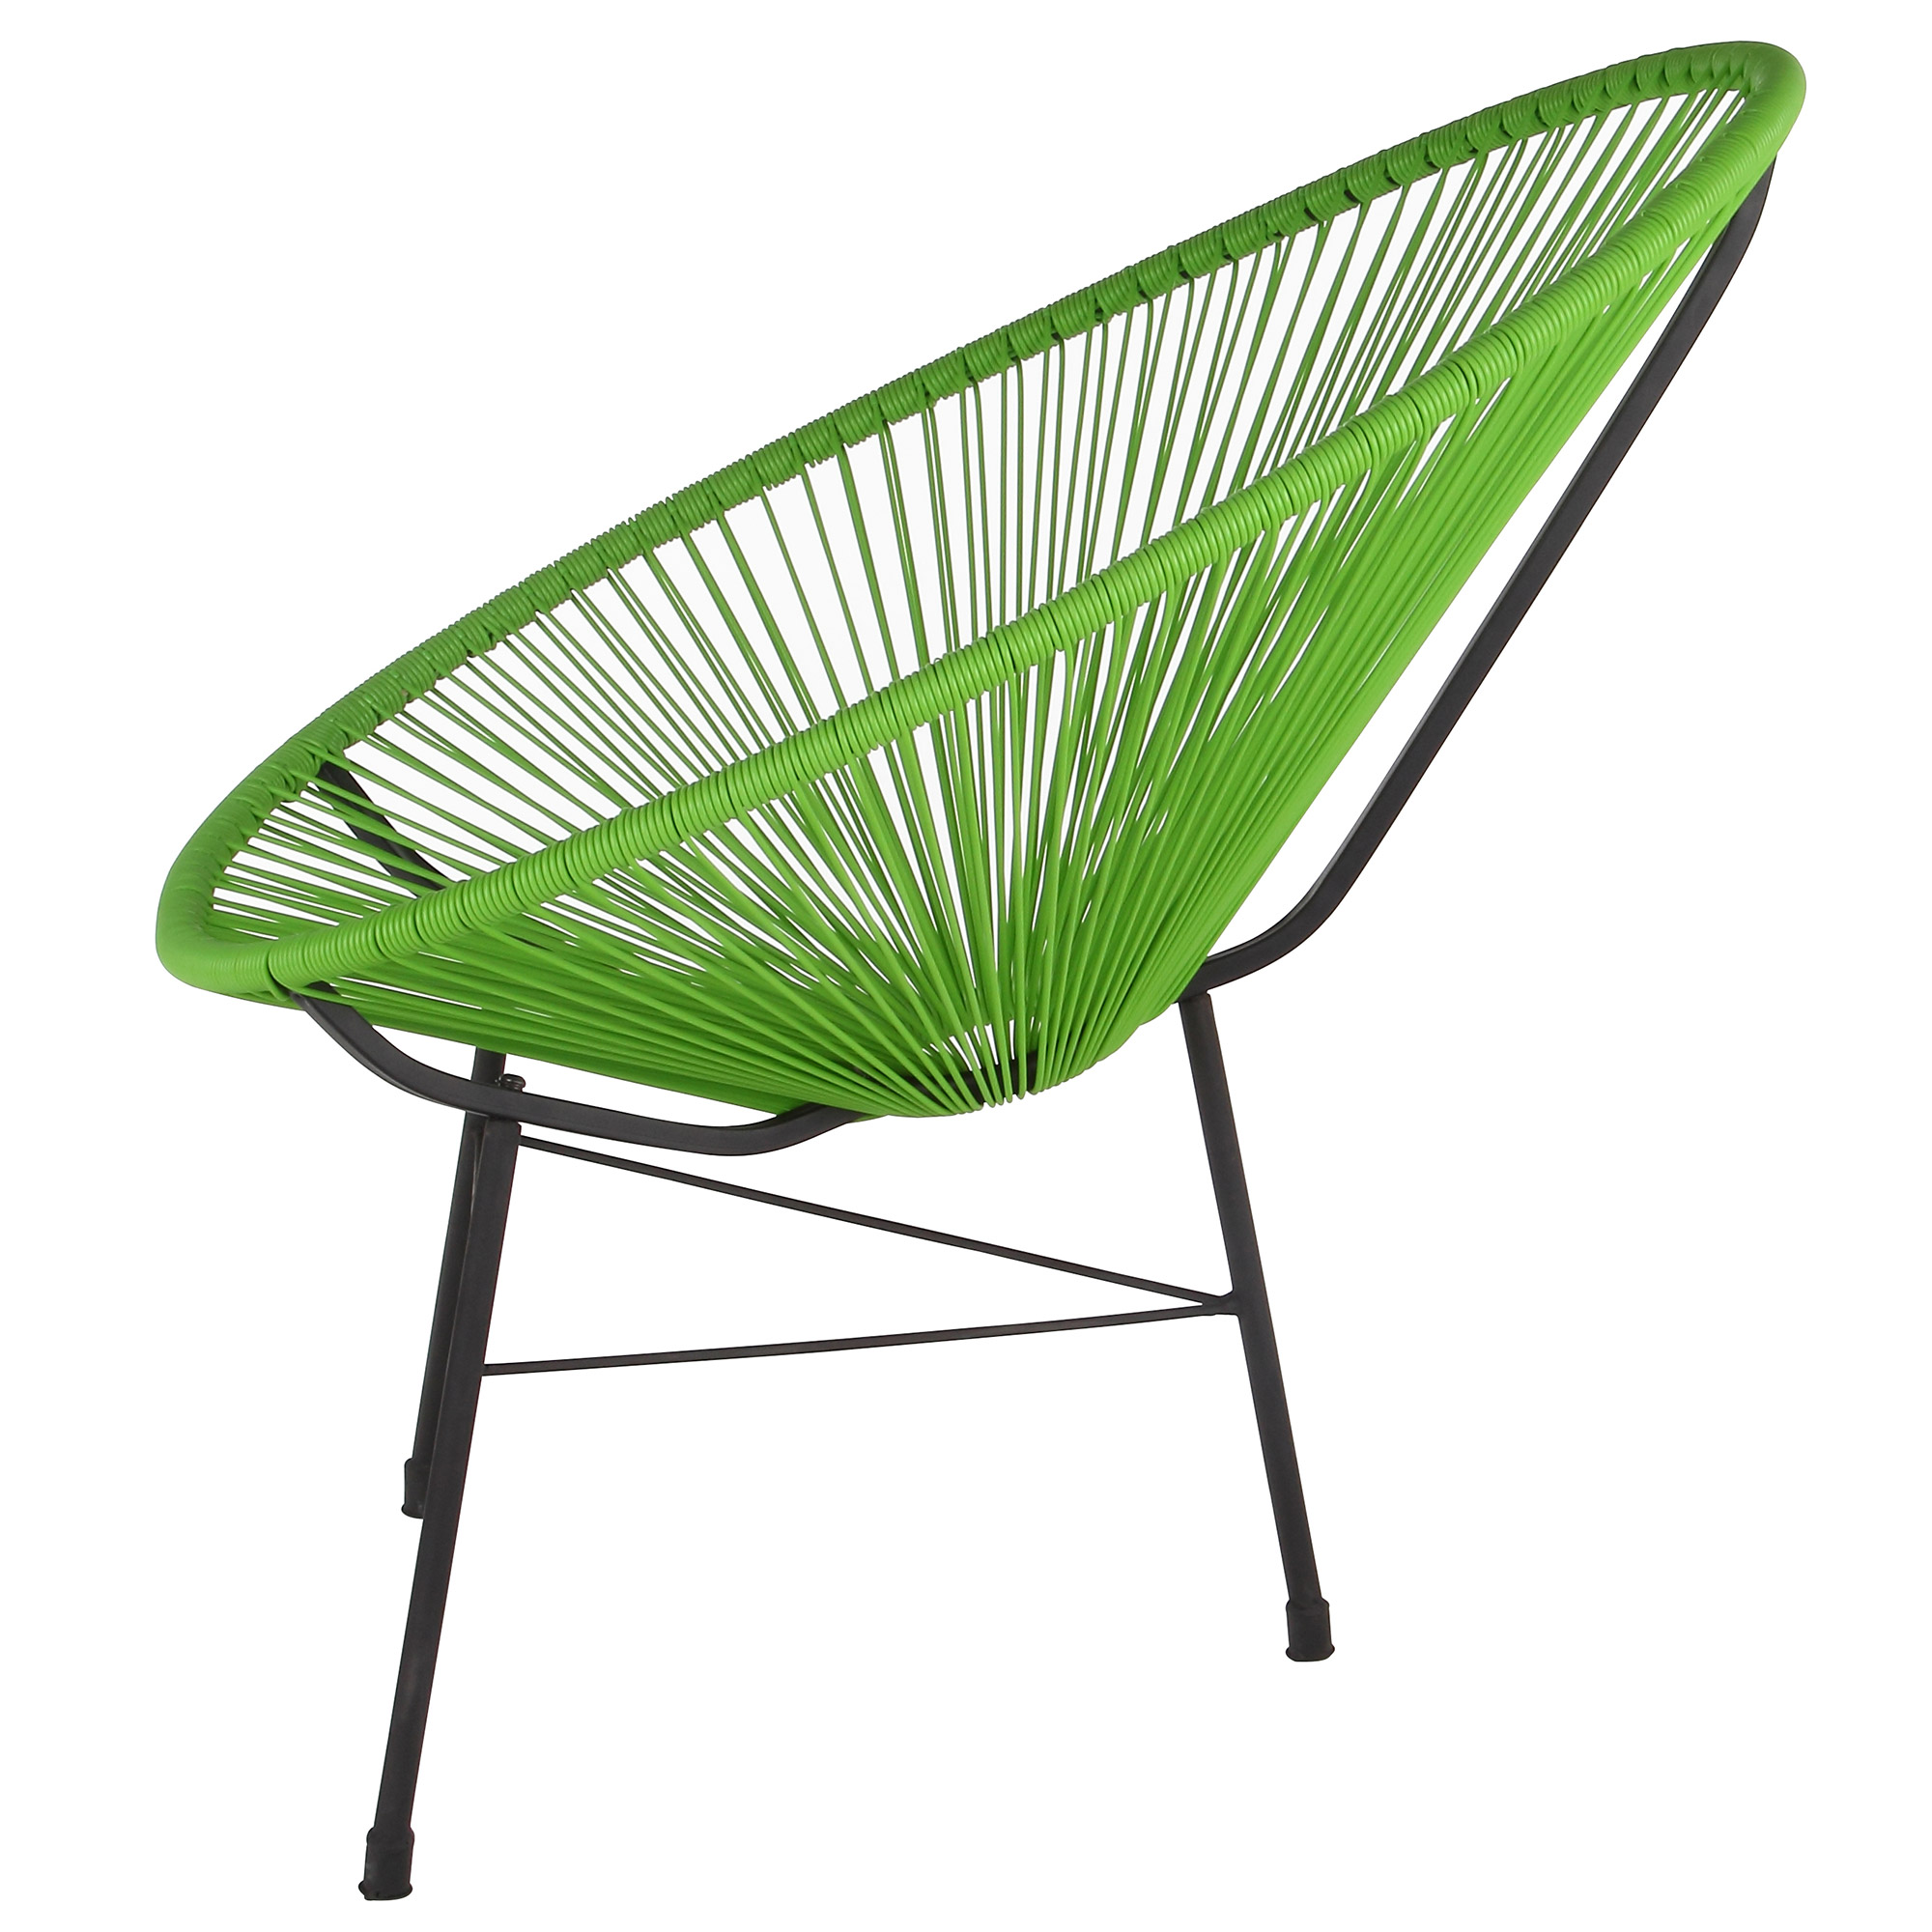 Acapulco Lounge Chair, Green, Set of 2 - image 3 of 3